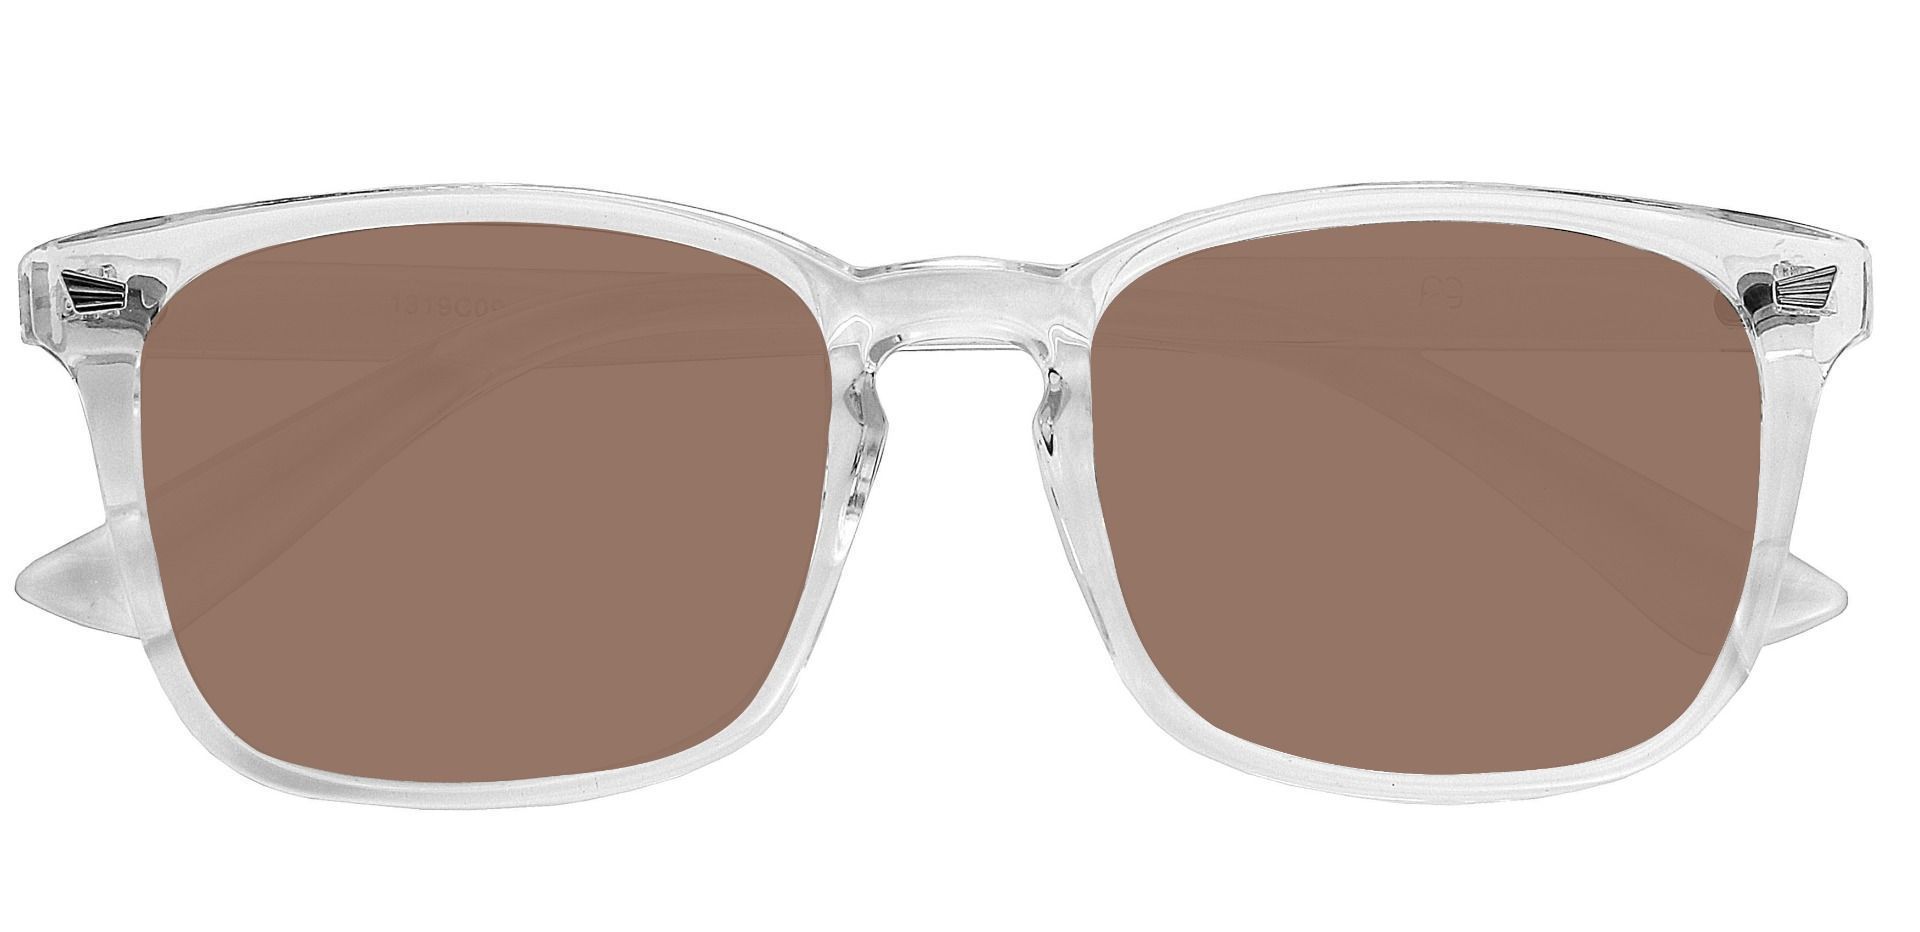 Rogan Square Lined Bifocal Sunglasses - Clear Frame With Brown Lenses